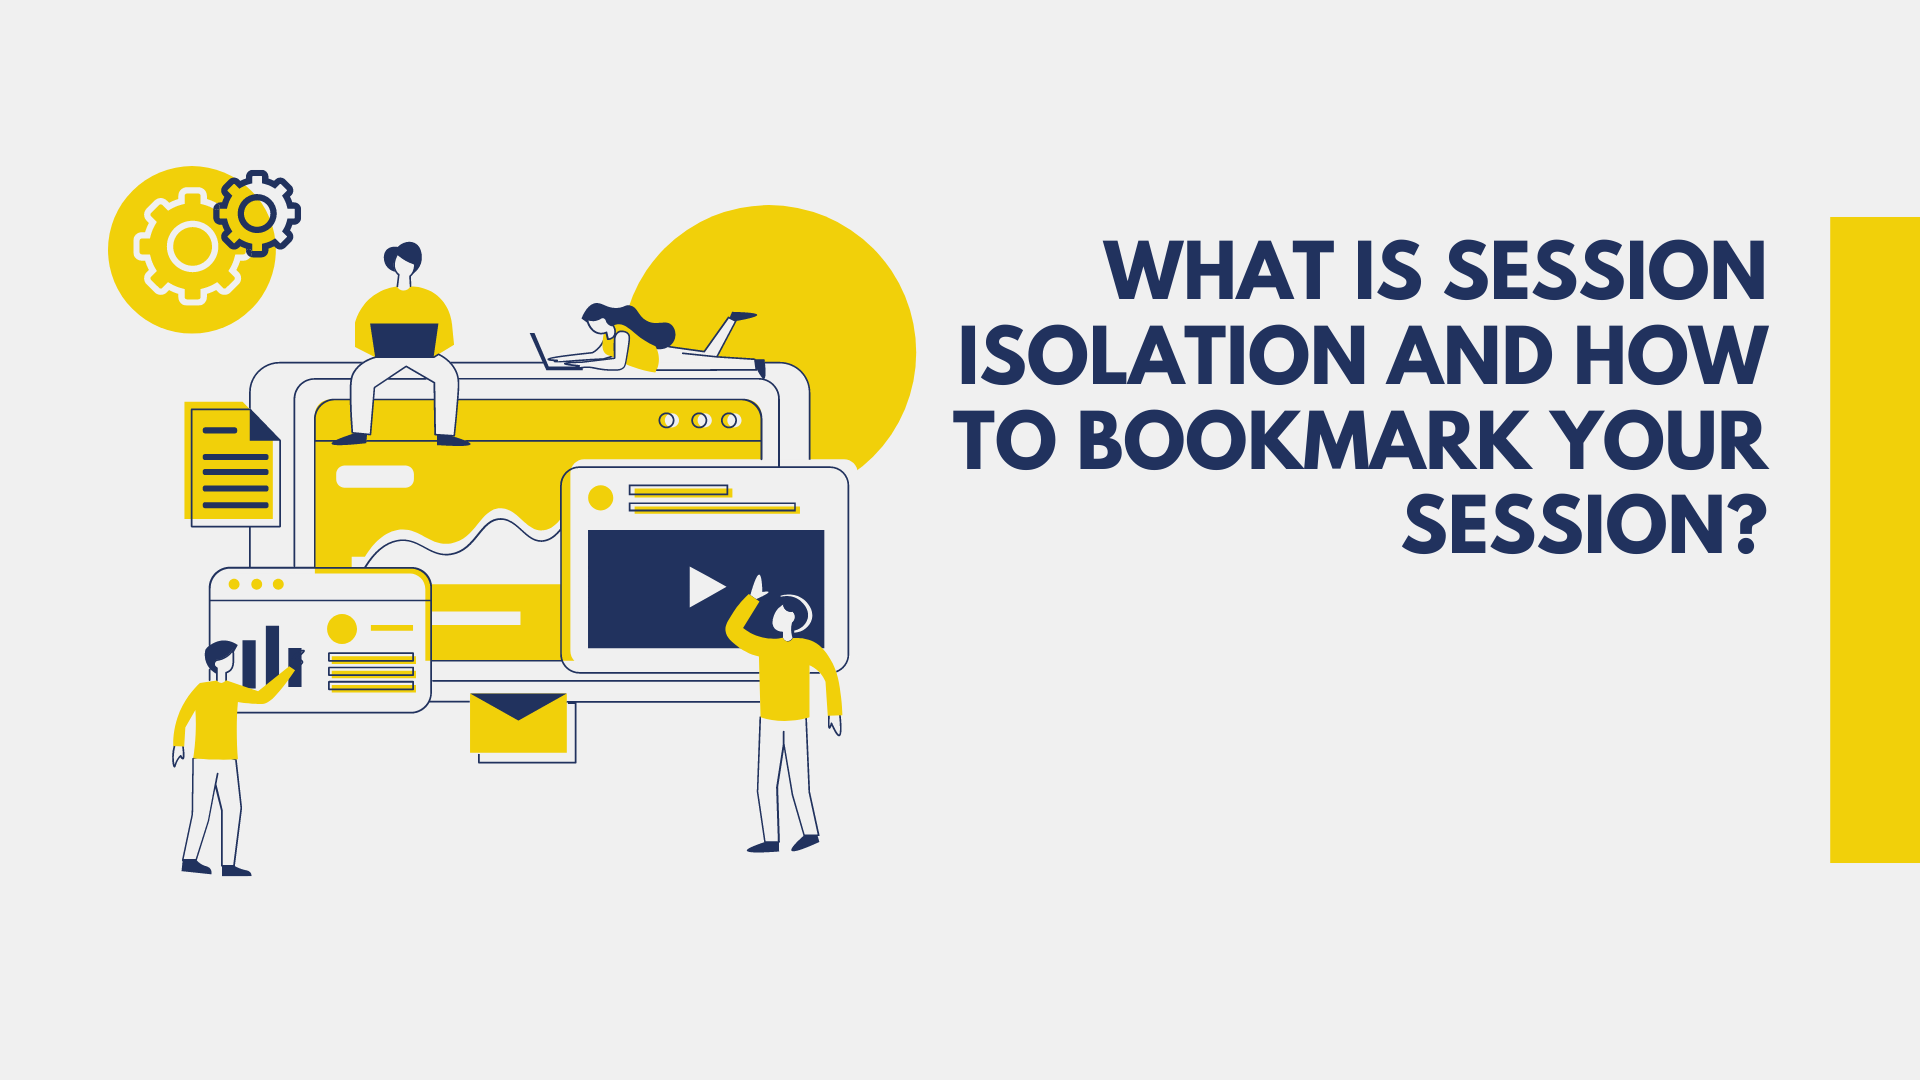 What is session isolation and how to bookmark your session?